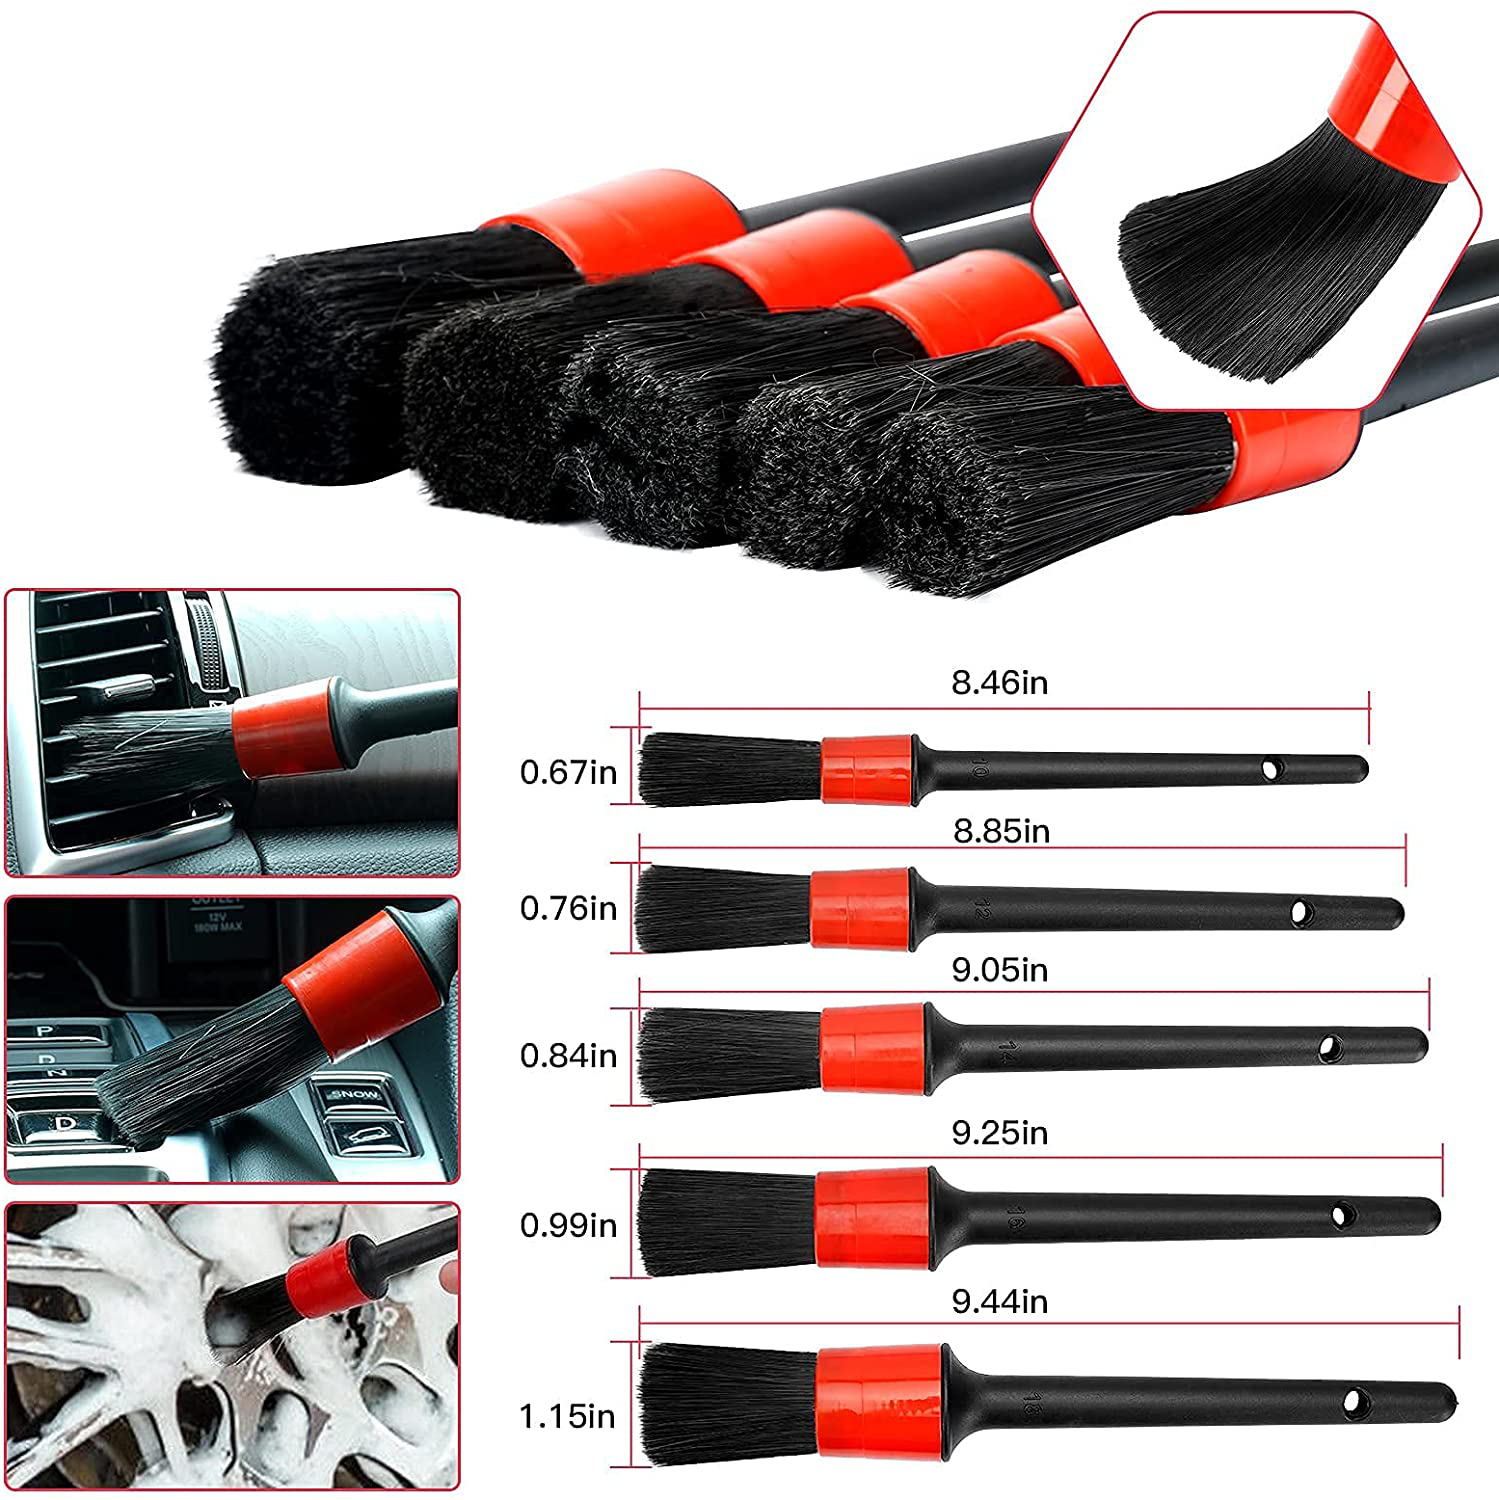 EVBOYS 16 Pcs Car Detailing Kit for Cleaning Wheels, Tires, Rims Drill Brush Wire Brush Automotive Air Conditioner Brush Car Wash Supplies, Auto Detailing Brush Kit Interior, Exterior